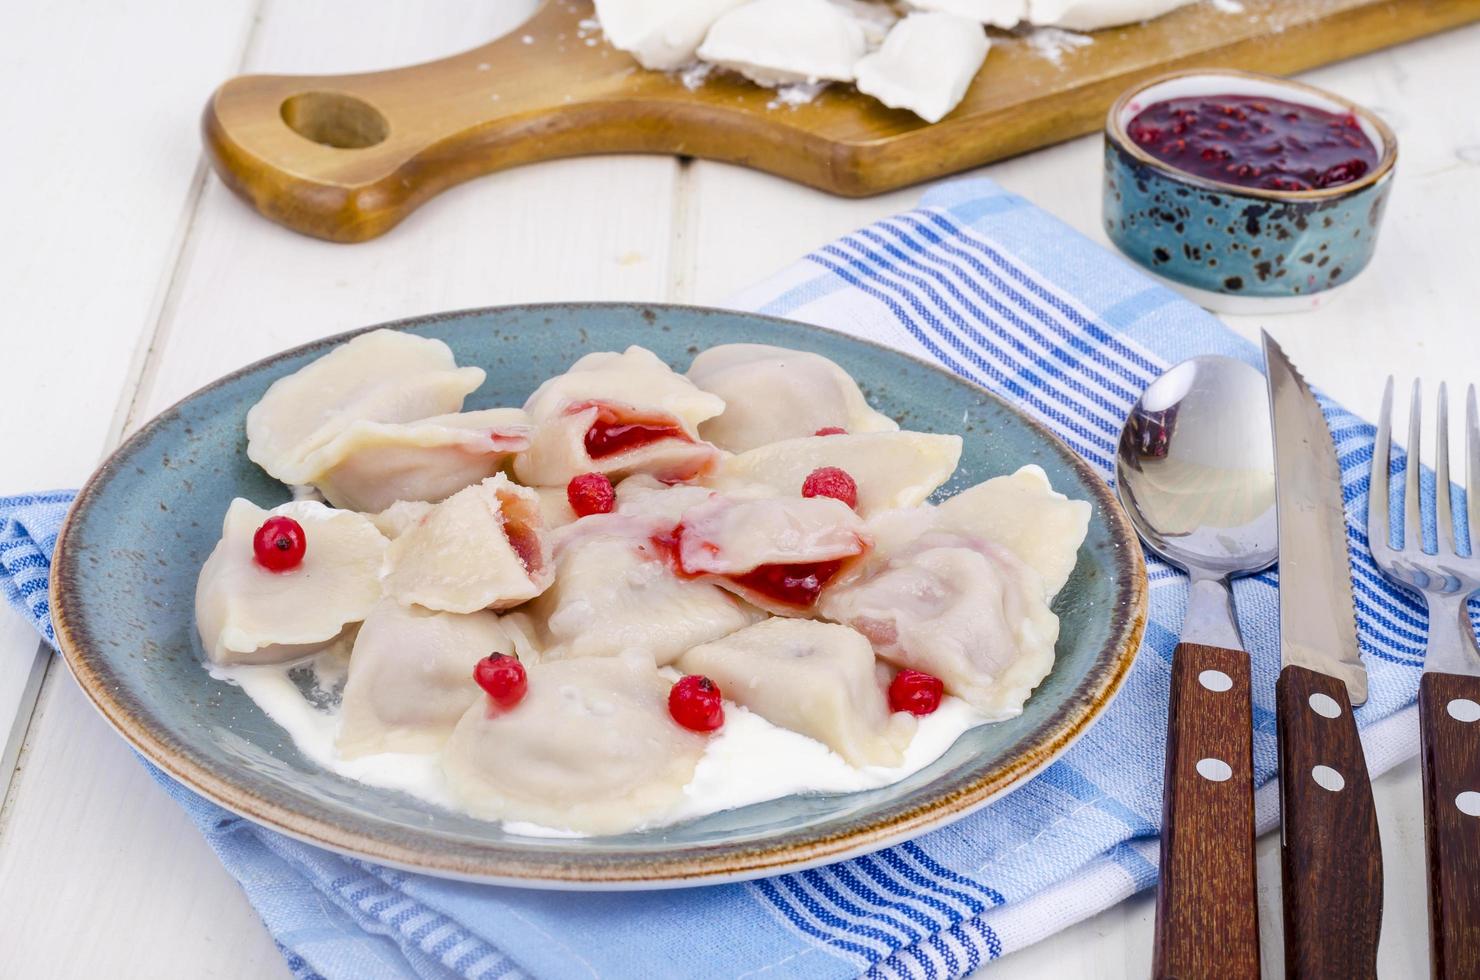 Dumplings with pastry stuffed with fresh berries. photo